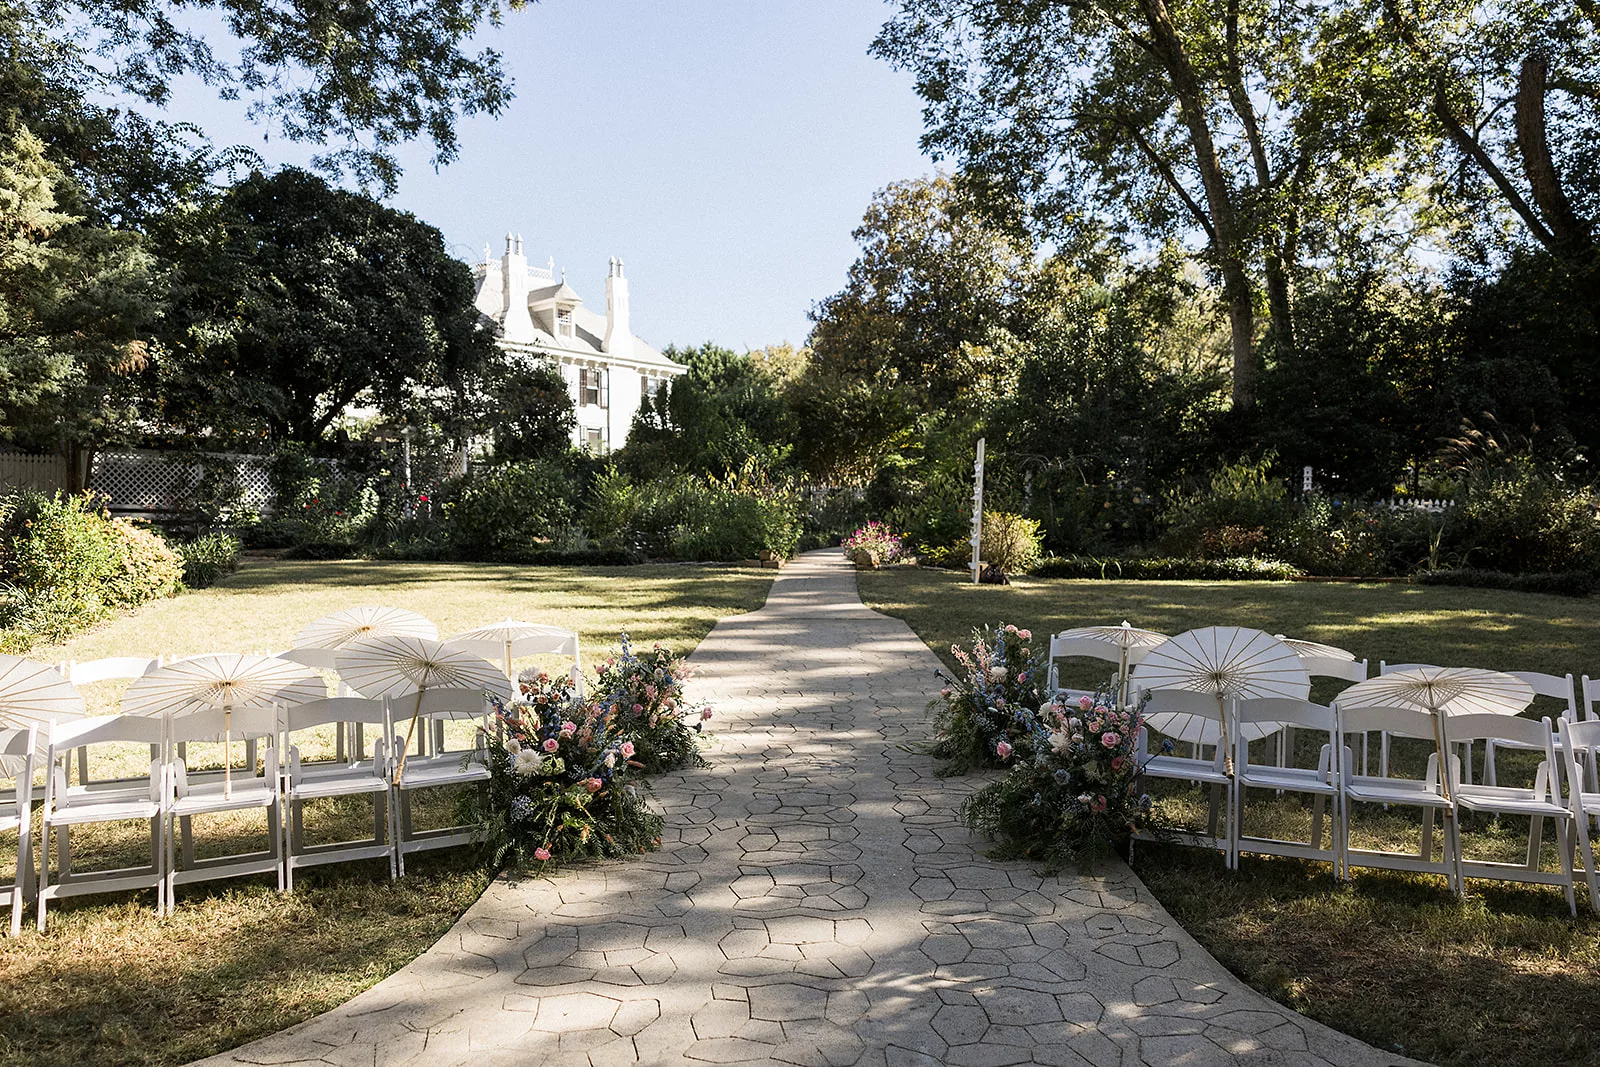 A view in the garden lawn of a wedding ceremony with a stone path